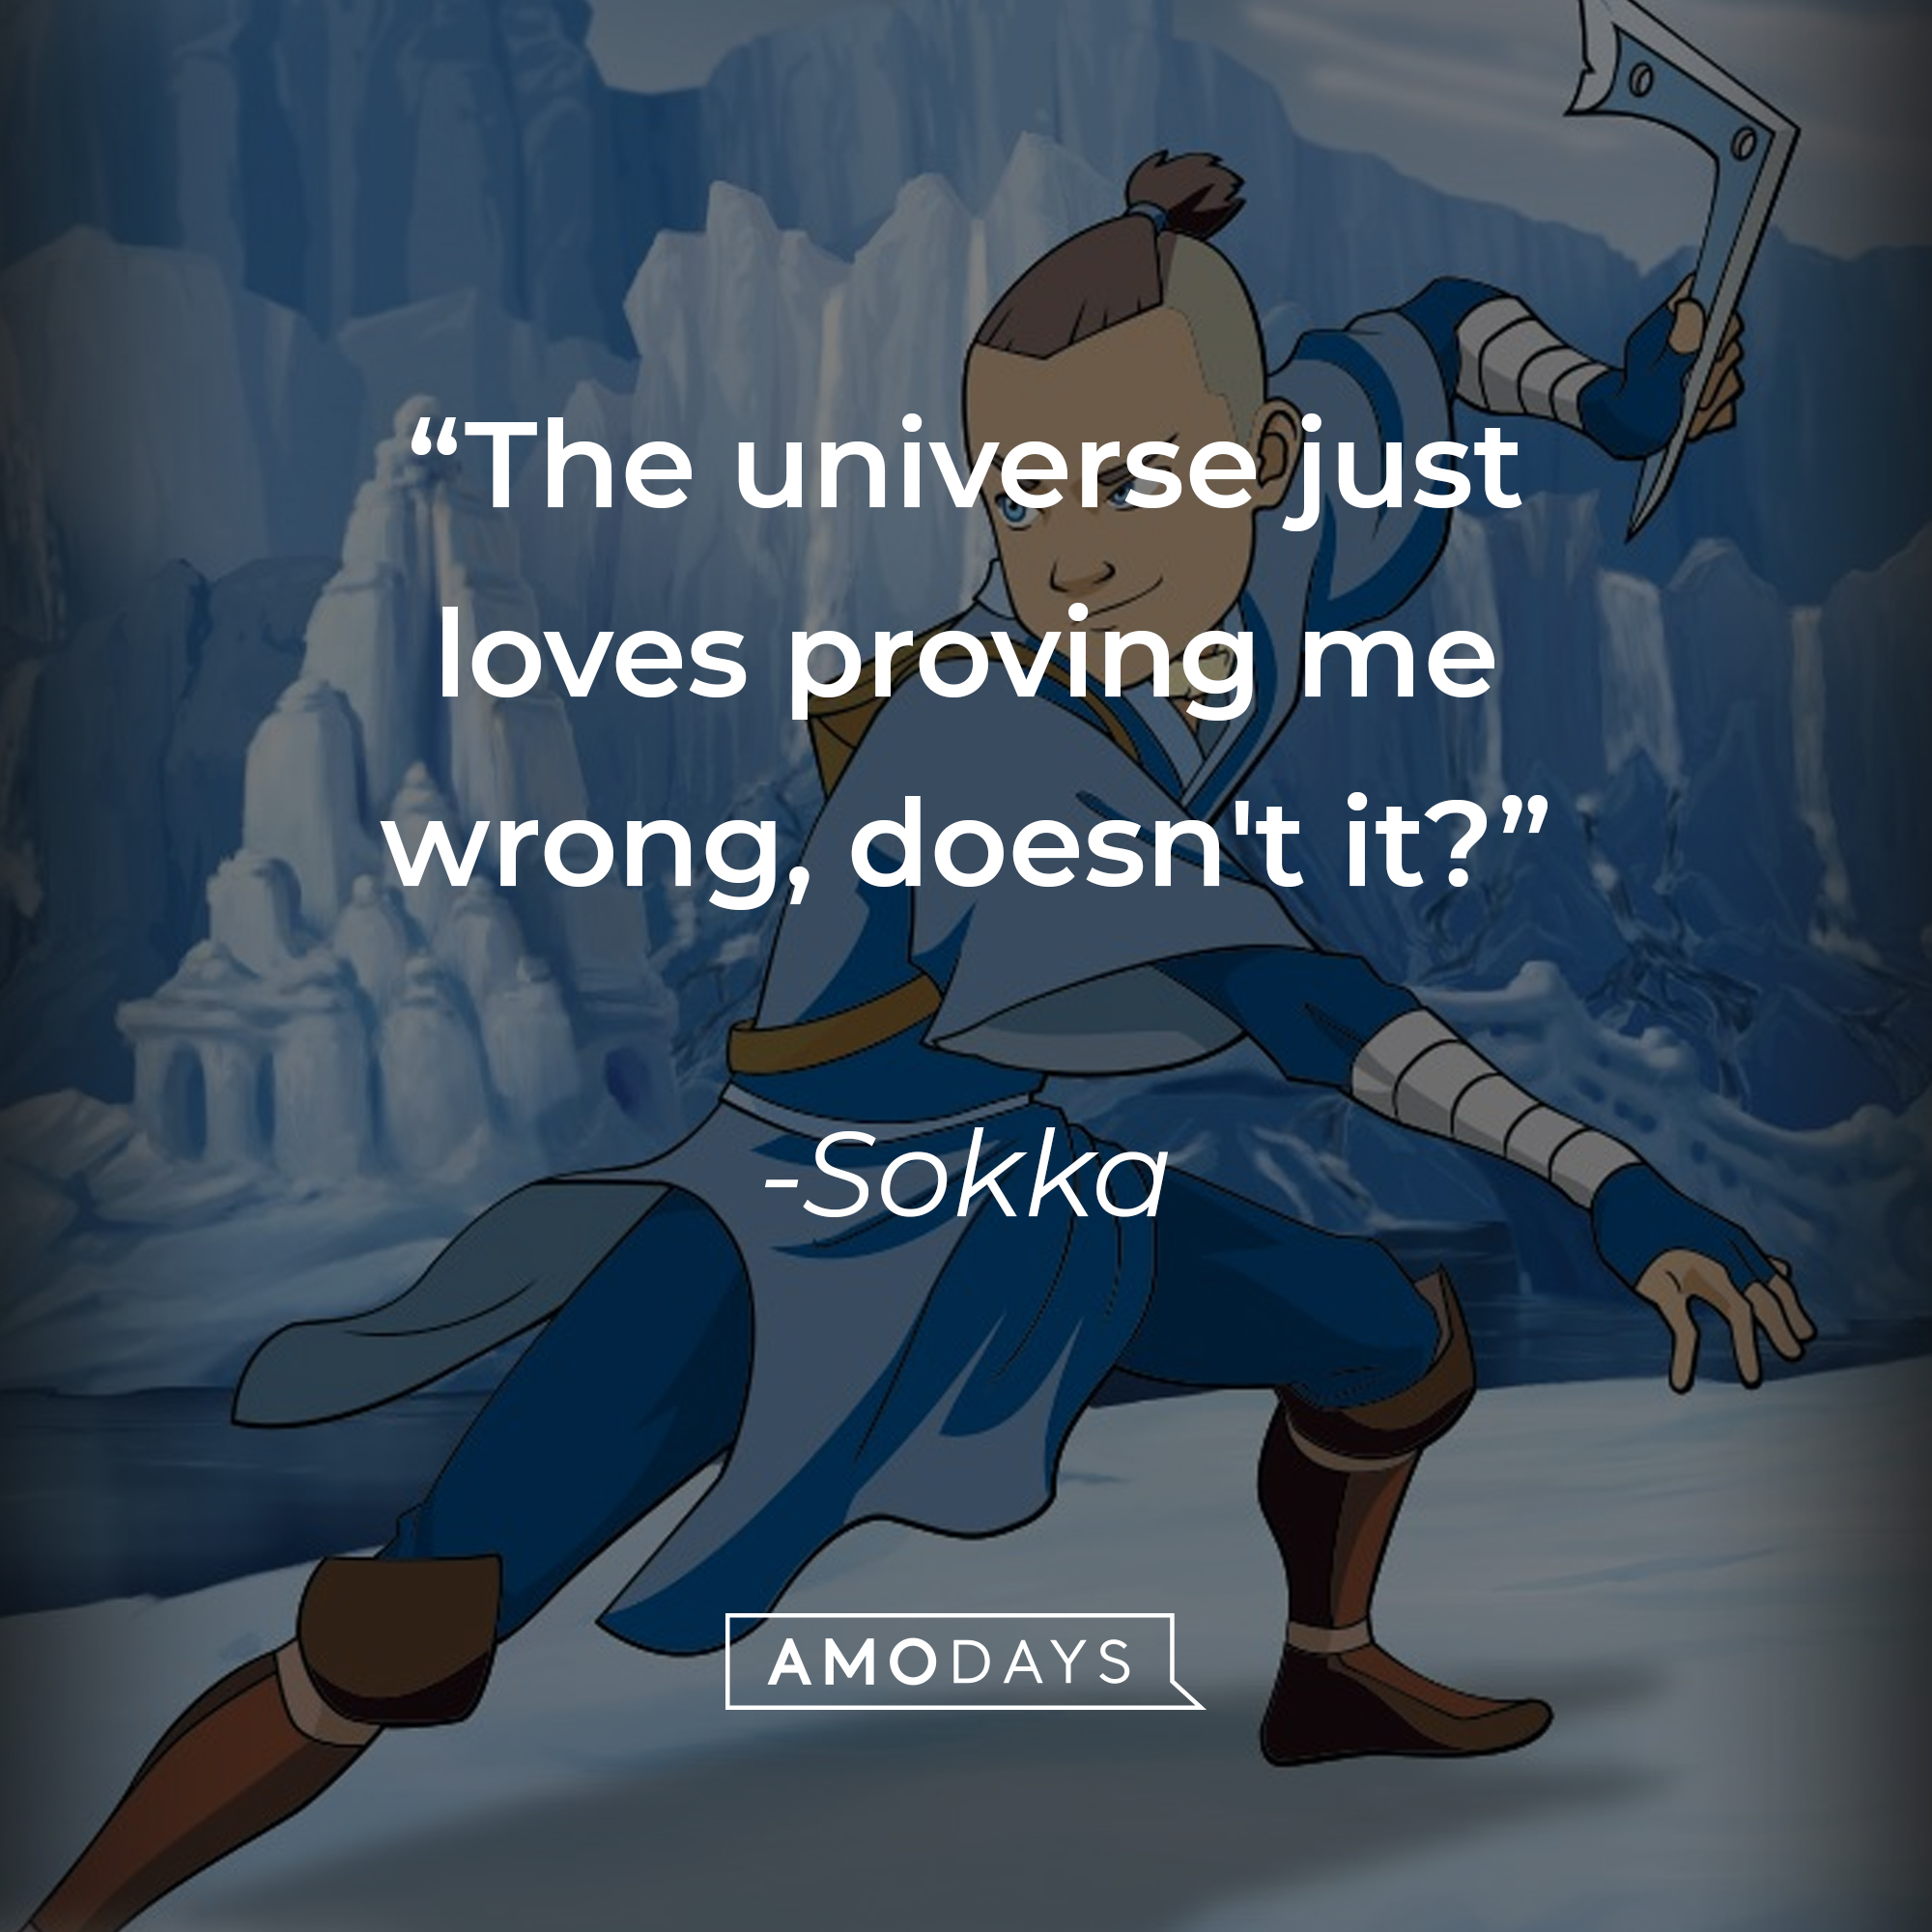 Sokka's quote: "The universe just loves proving me wrong, doesn't it?" | Source: facebook.com/avatarthelastairbender